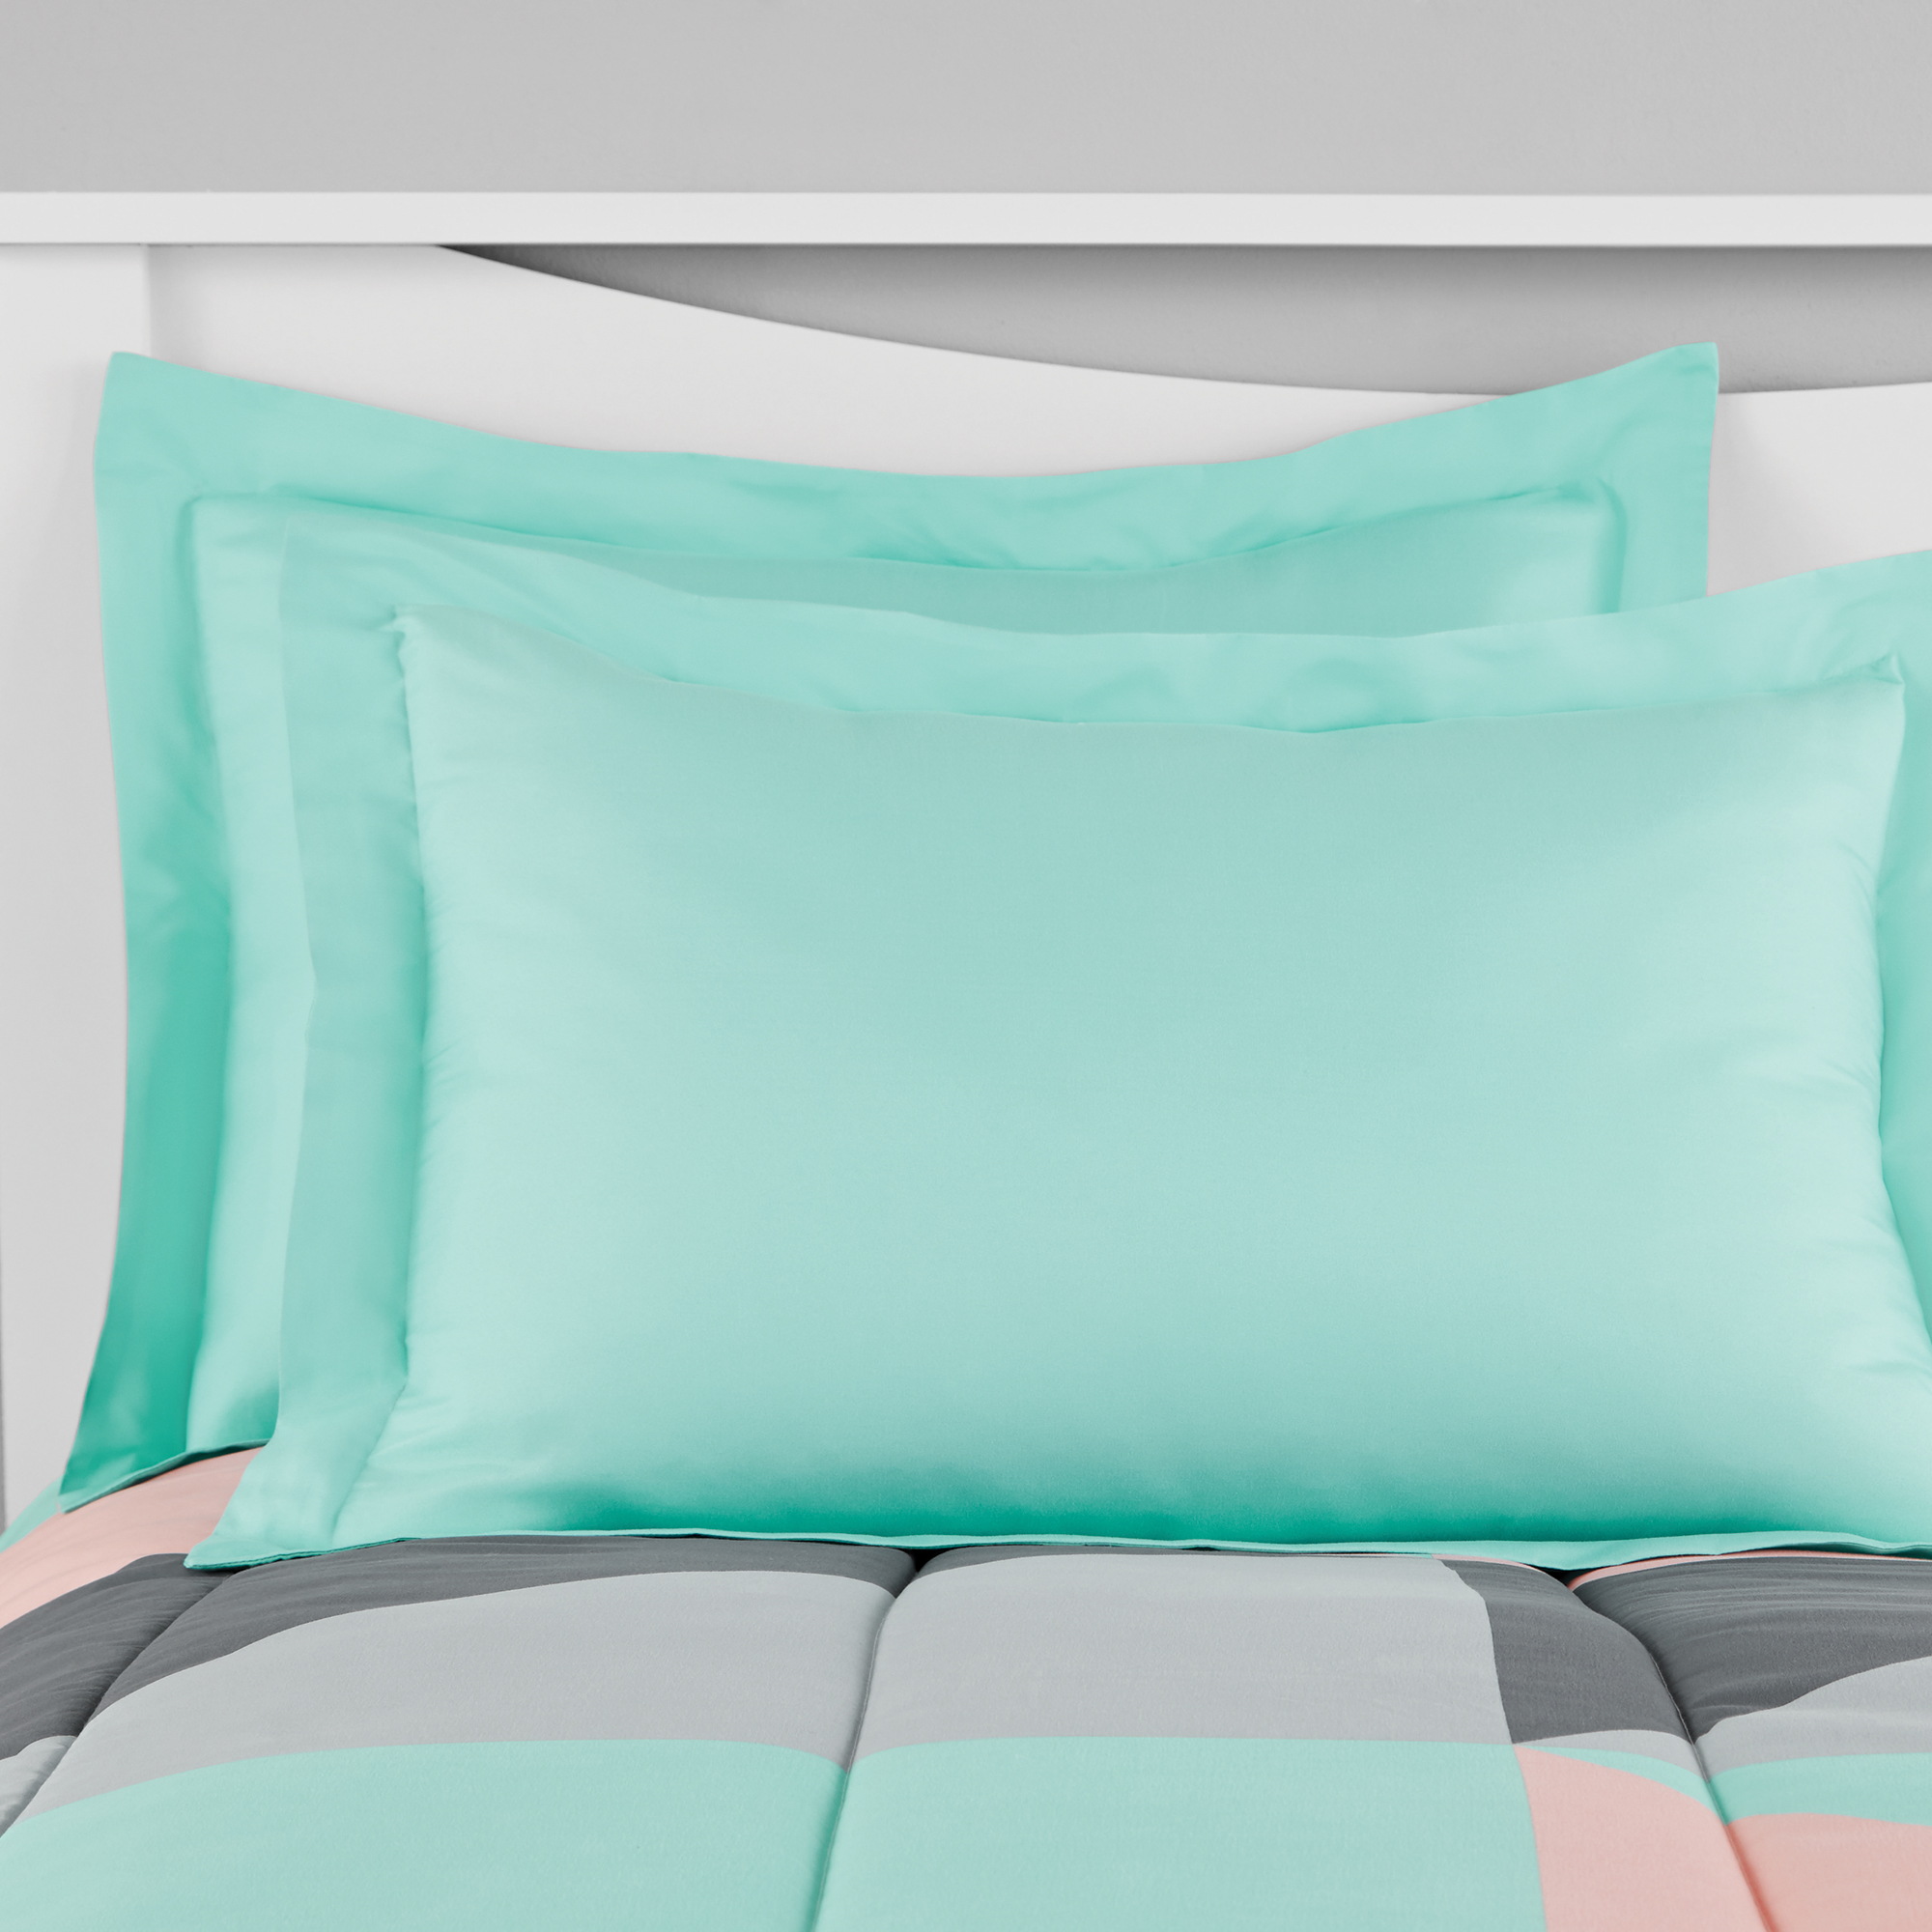 Mainstays Gray and Teal Geometric 8 Piece Bed in a Bag Comforter Set With Sheets, King - image 4 of 8